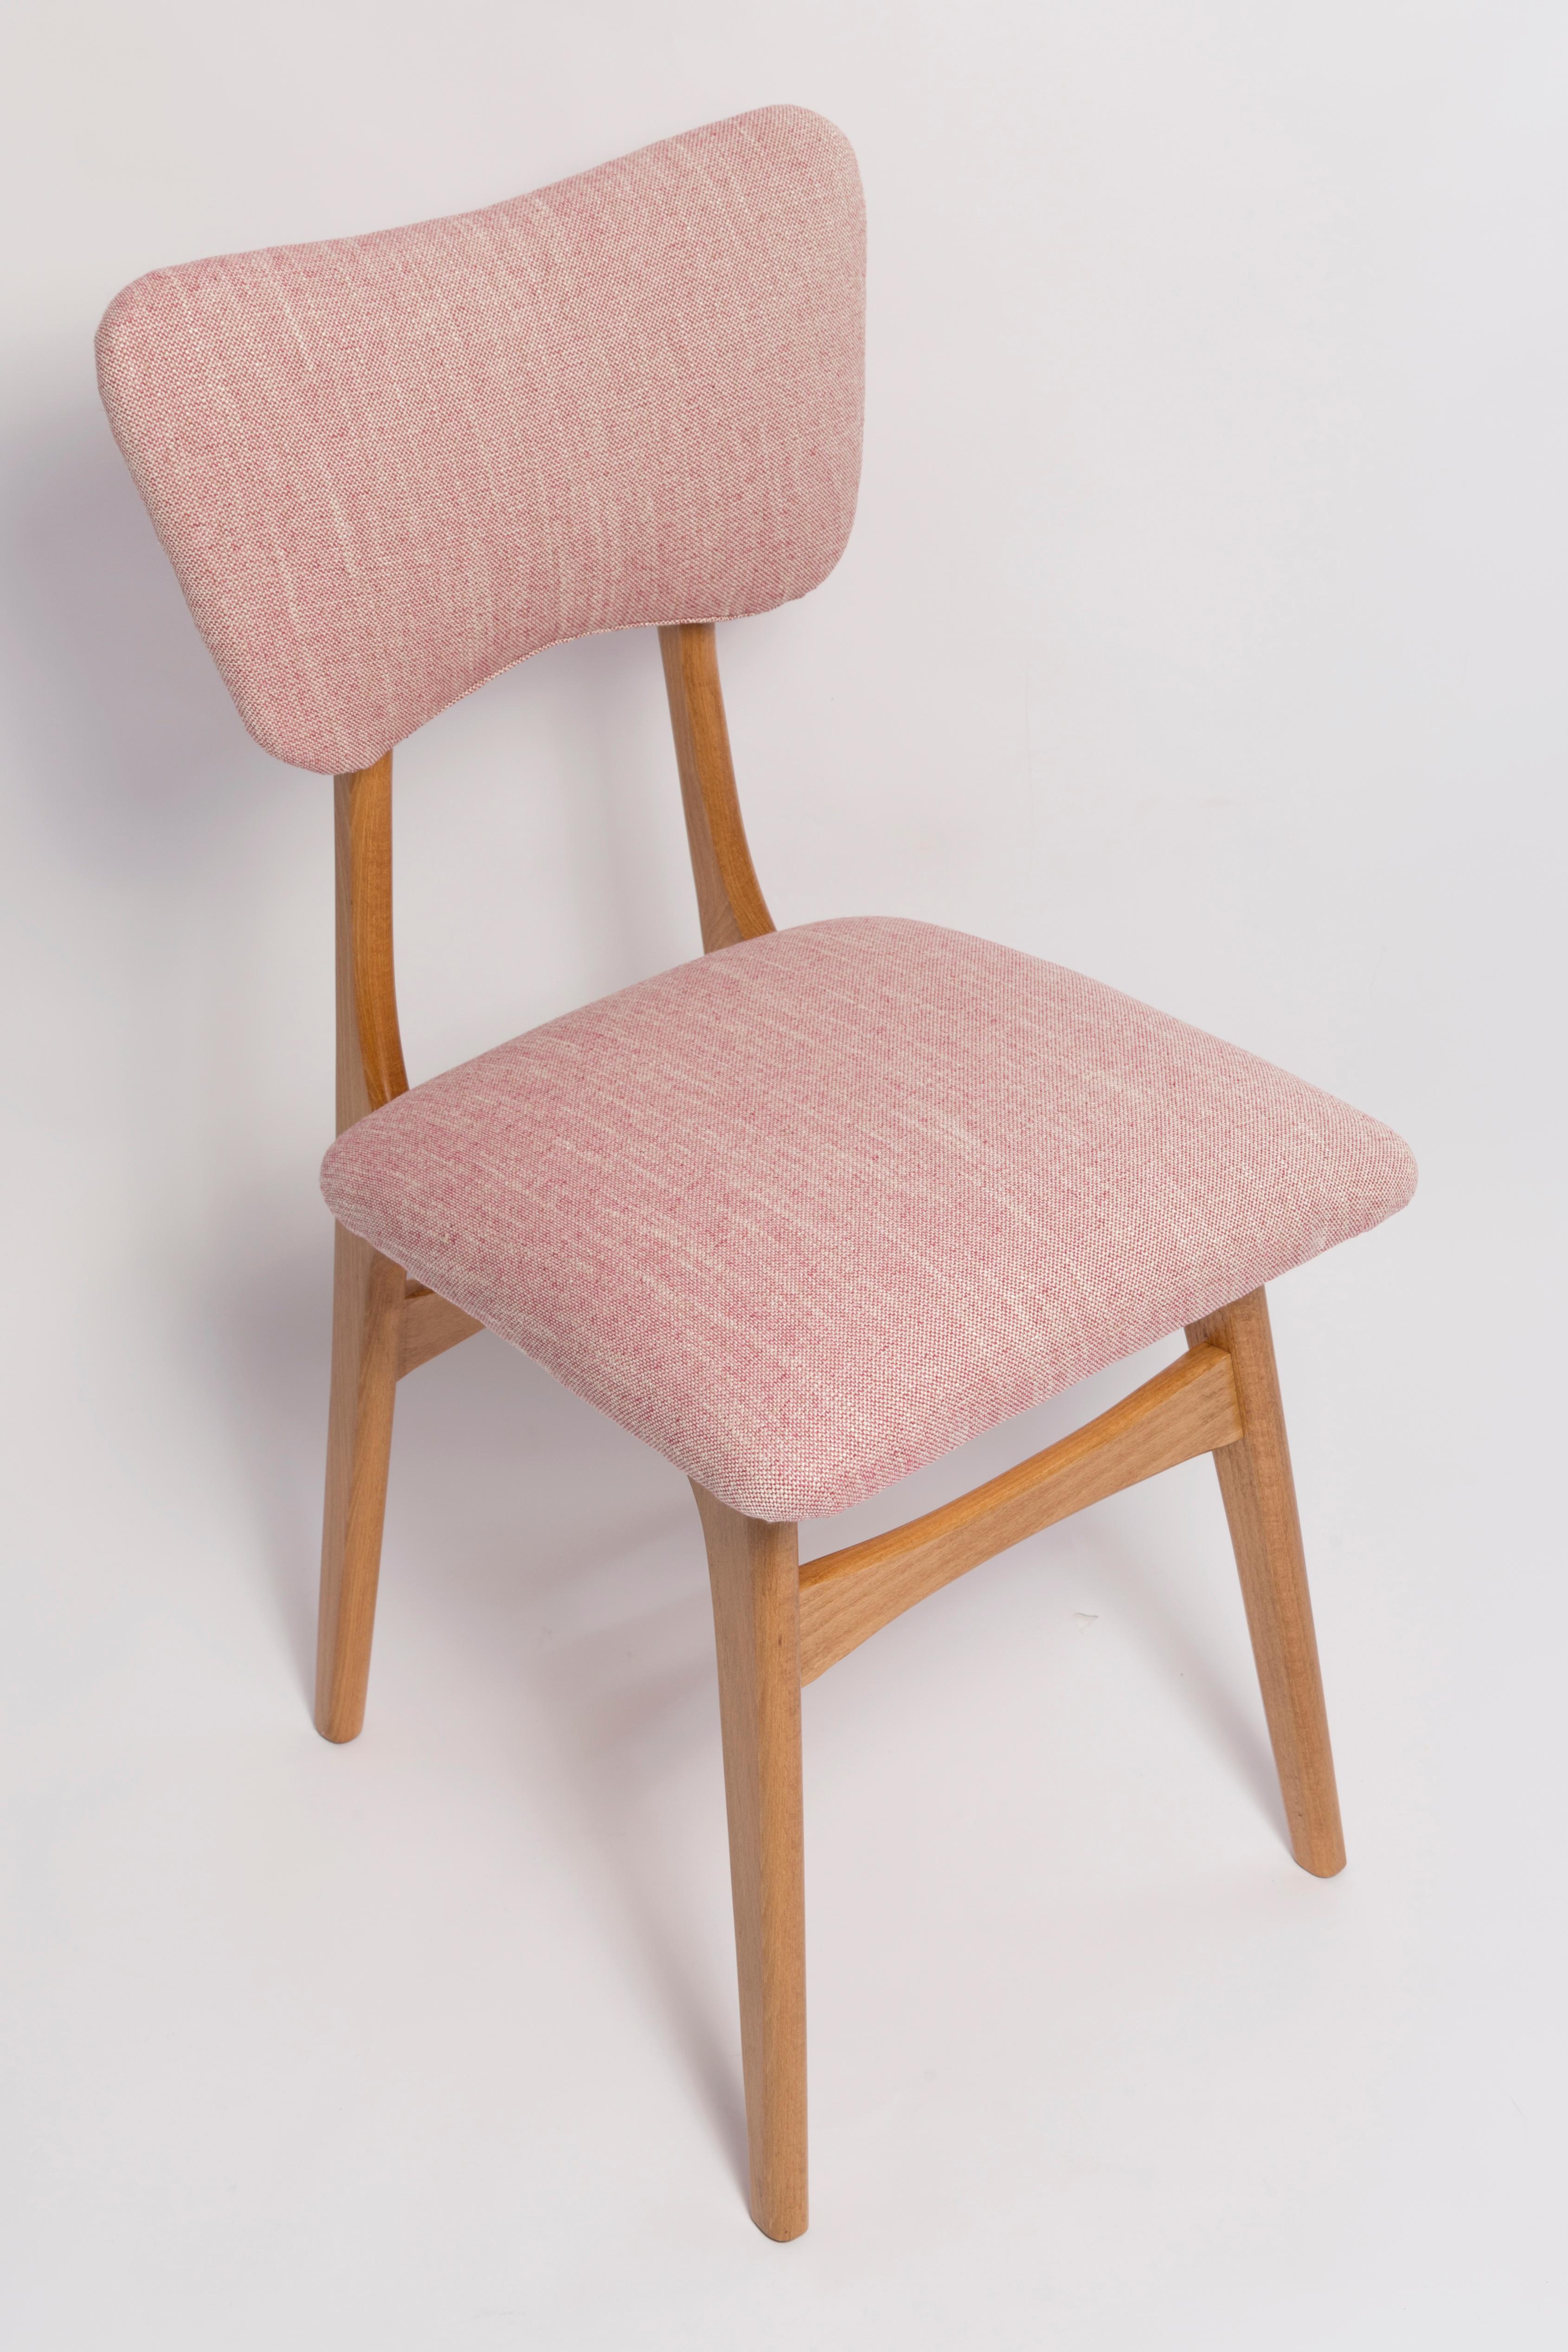 Polish Six Mid-Century Butterfly Dining Chairs, Pink Linen, Light Wood, Europe, 1960s For Sale